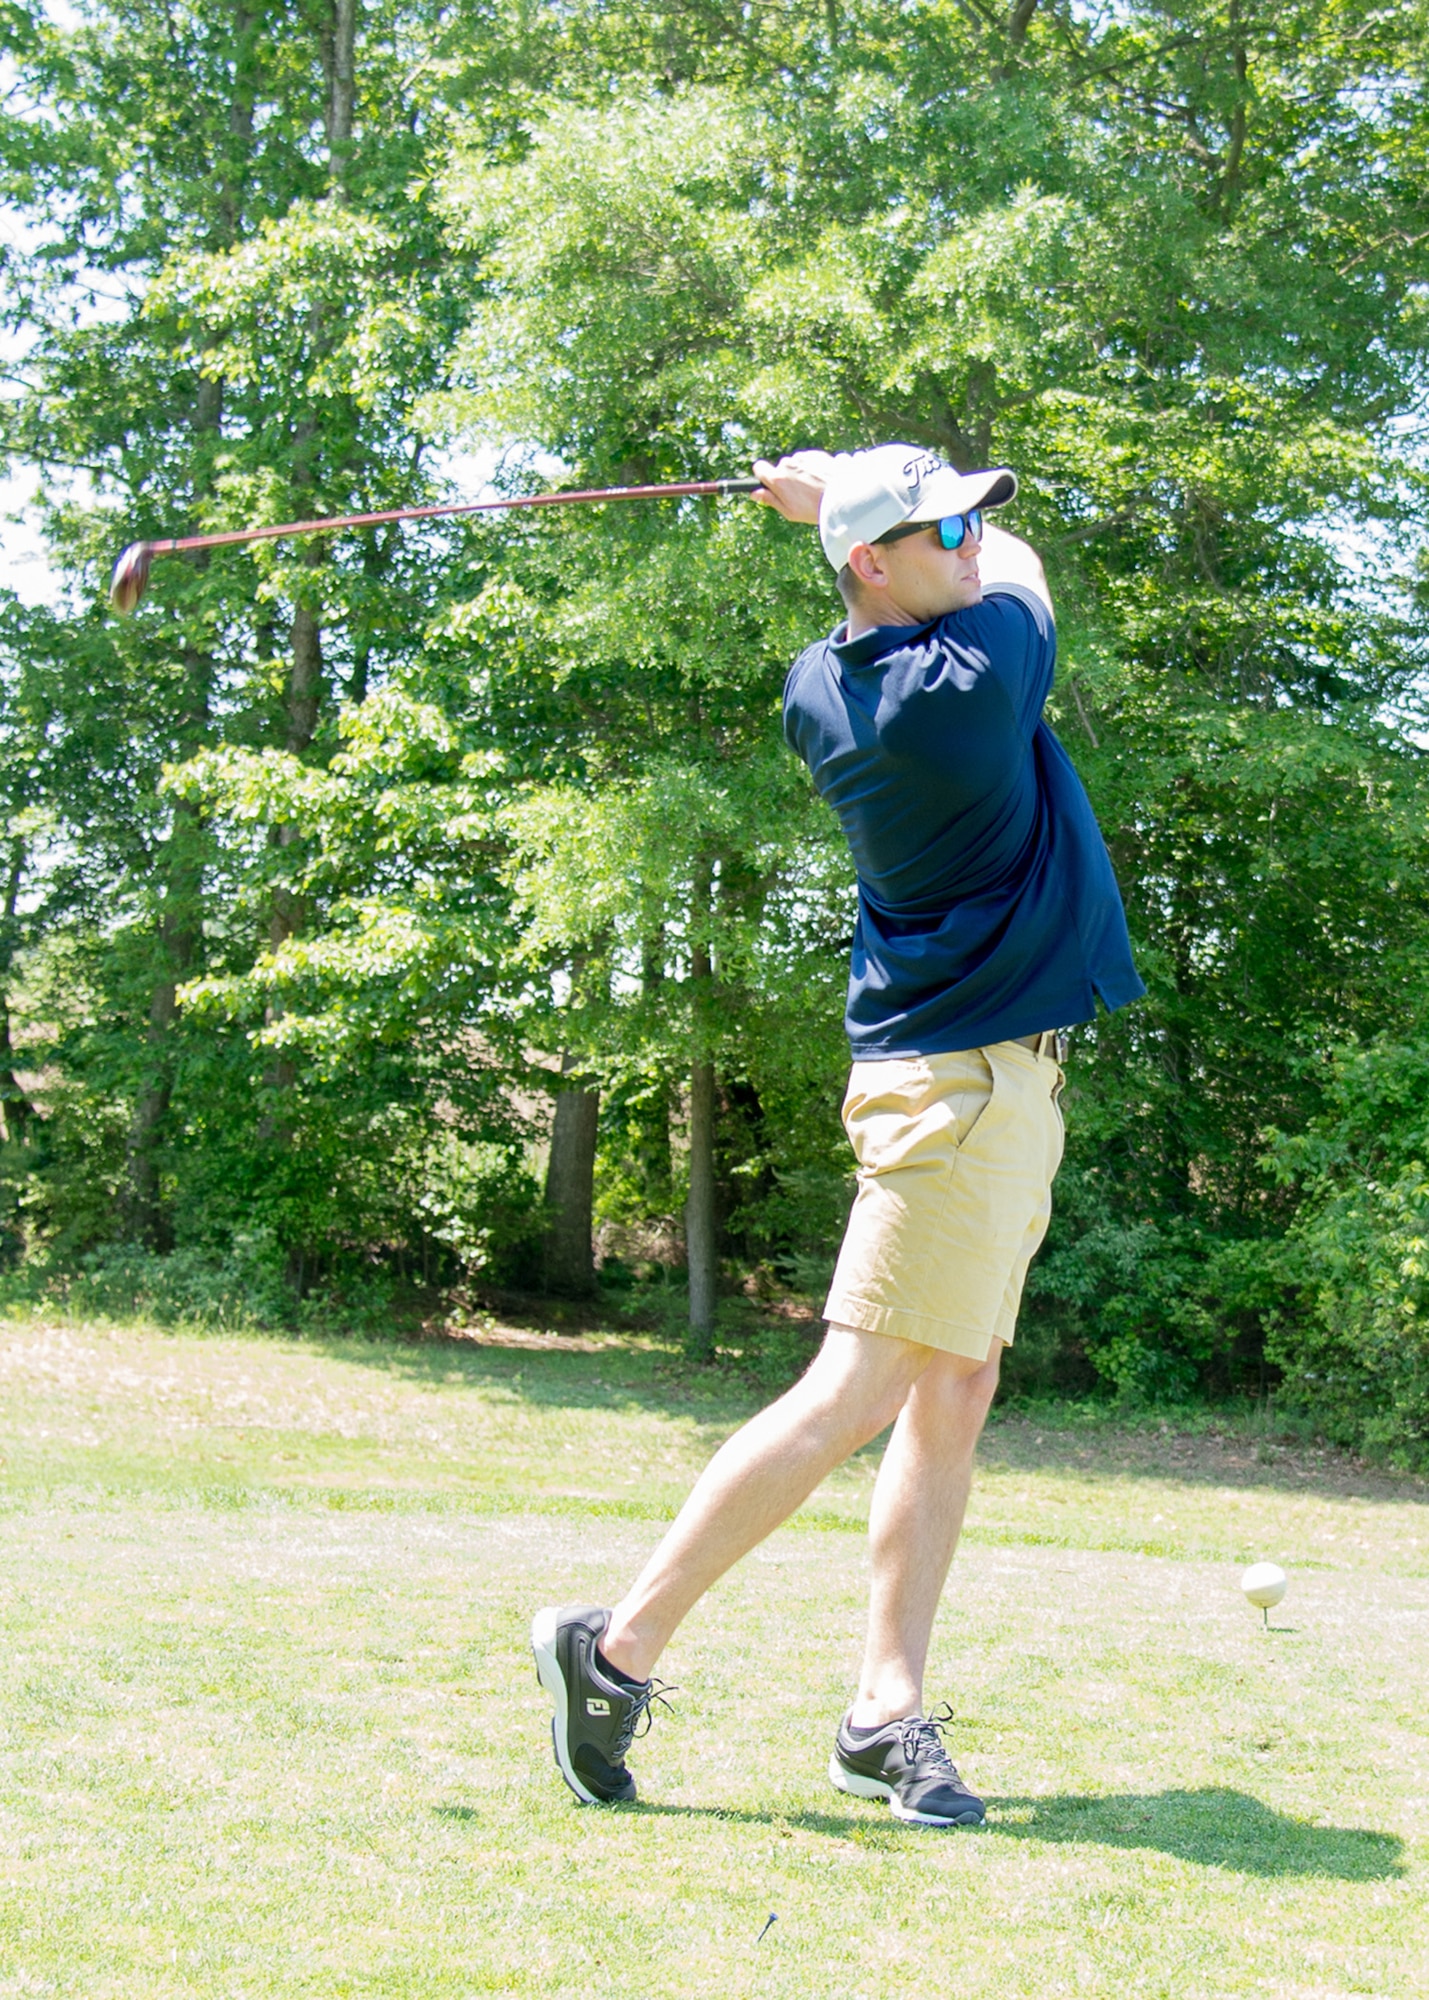 1st Lt. Dillon Heckendorn, 436th Operations Support Squadron intelligence officer, tees off at the 2017 spring Bluesuiters Golf Tournament May 17, 2017, 2016, at the Jonathan’s Landing Golf Course in Magnolia, Delaware. Bluesuiters is a biannual golf tournament aimed at connecting Team Dover Airmen with local civic and business leaders. (U.S. Air Force photo by Mauricio Campino)